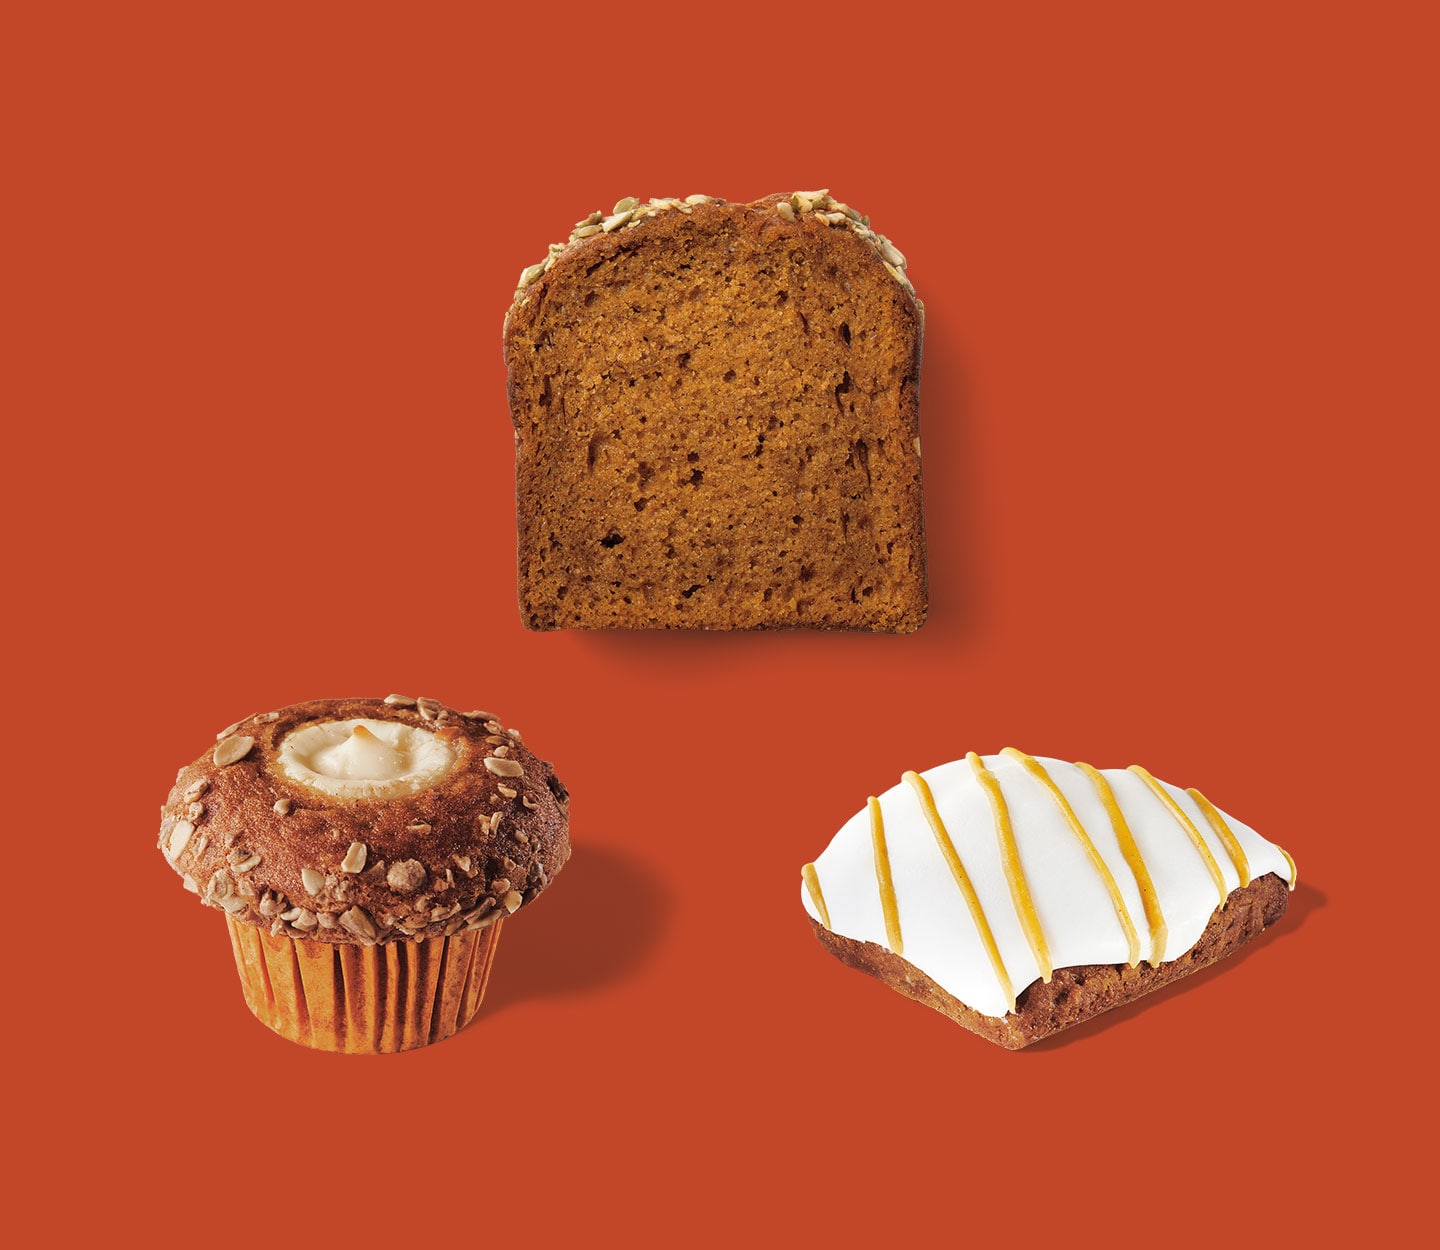 Three baked items form a triangular shape: Muffin with creamy center, slice of a loaf cake and frosted scone.